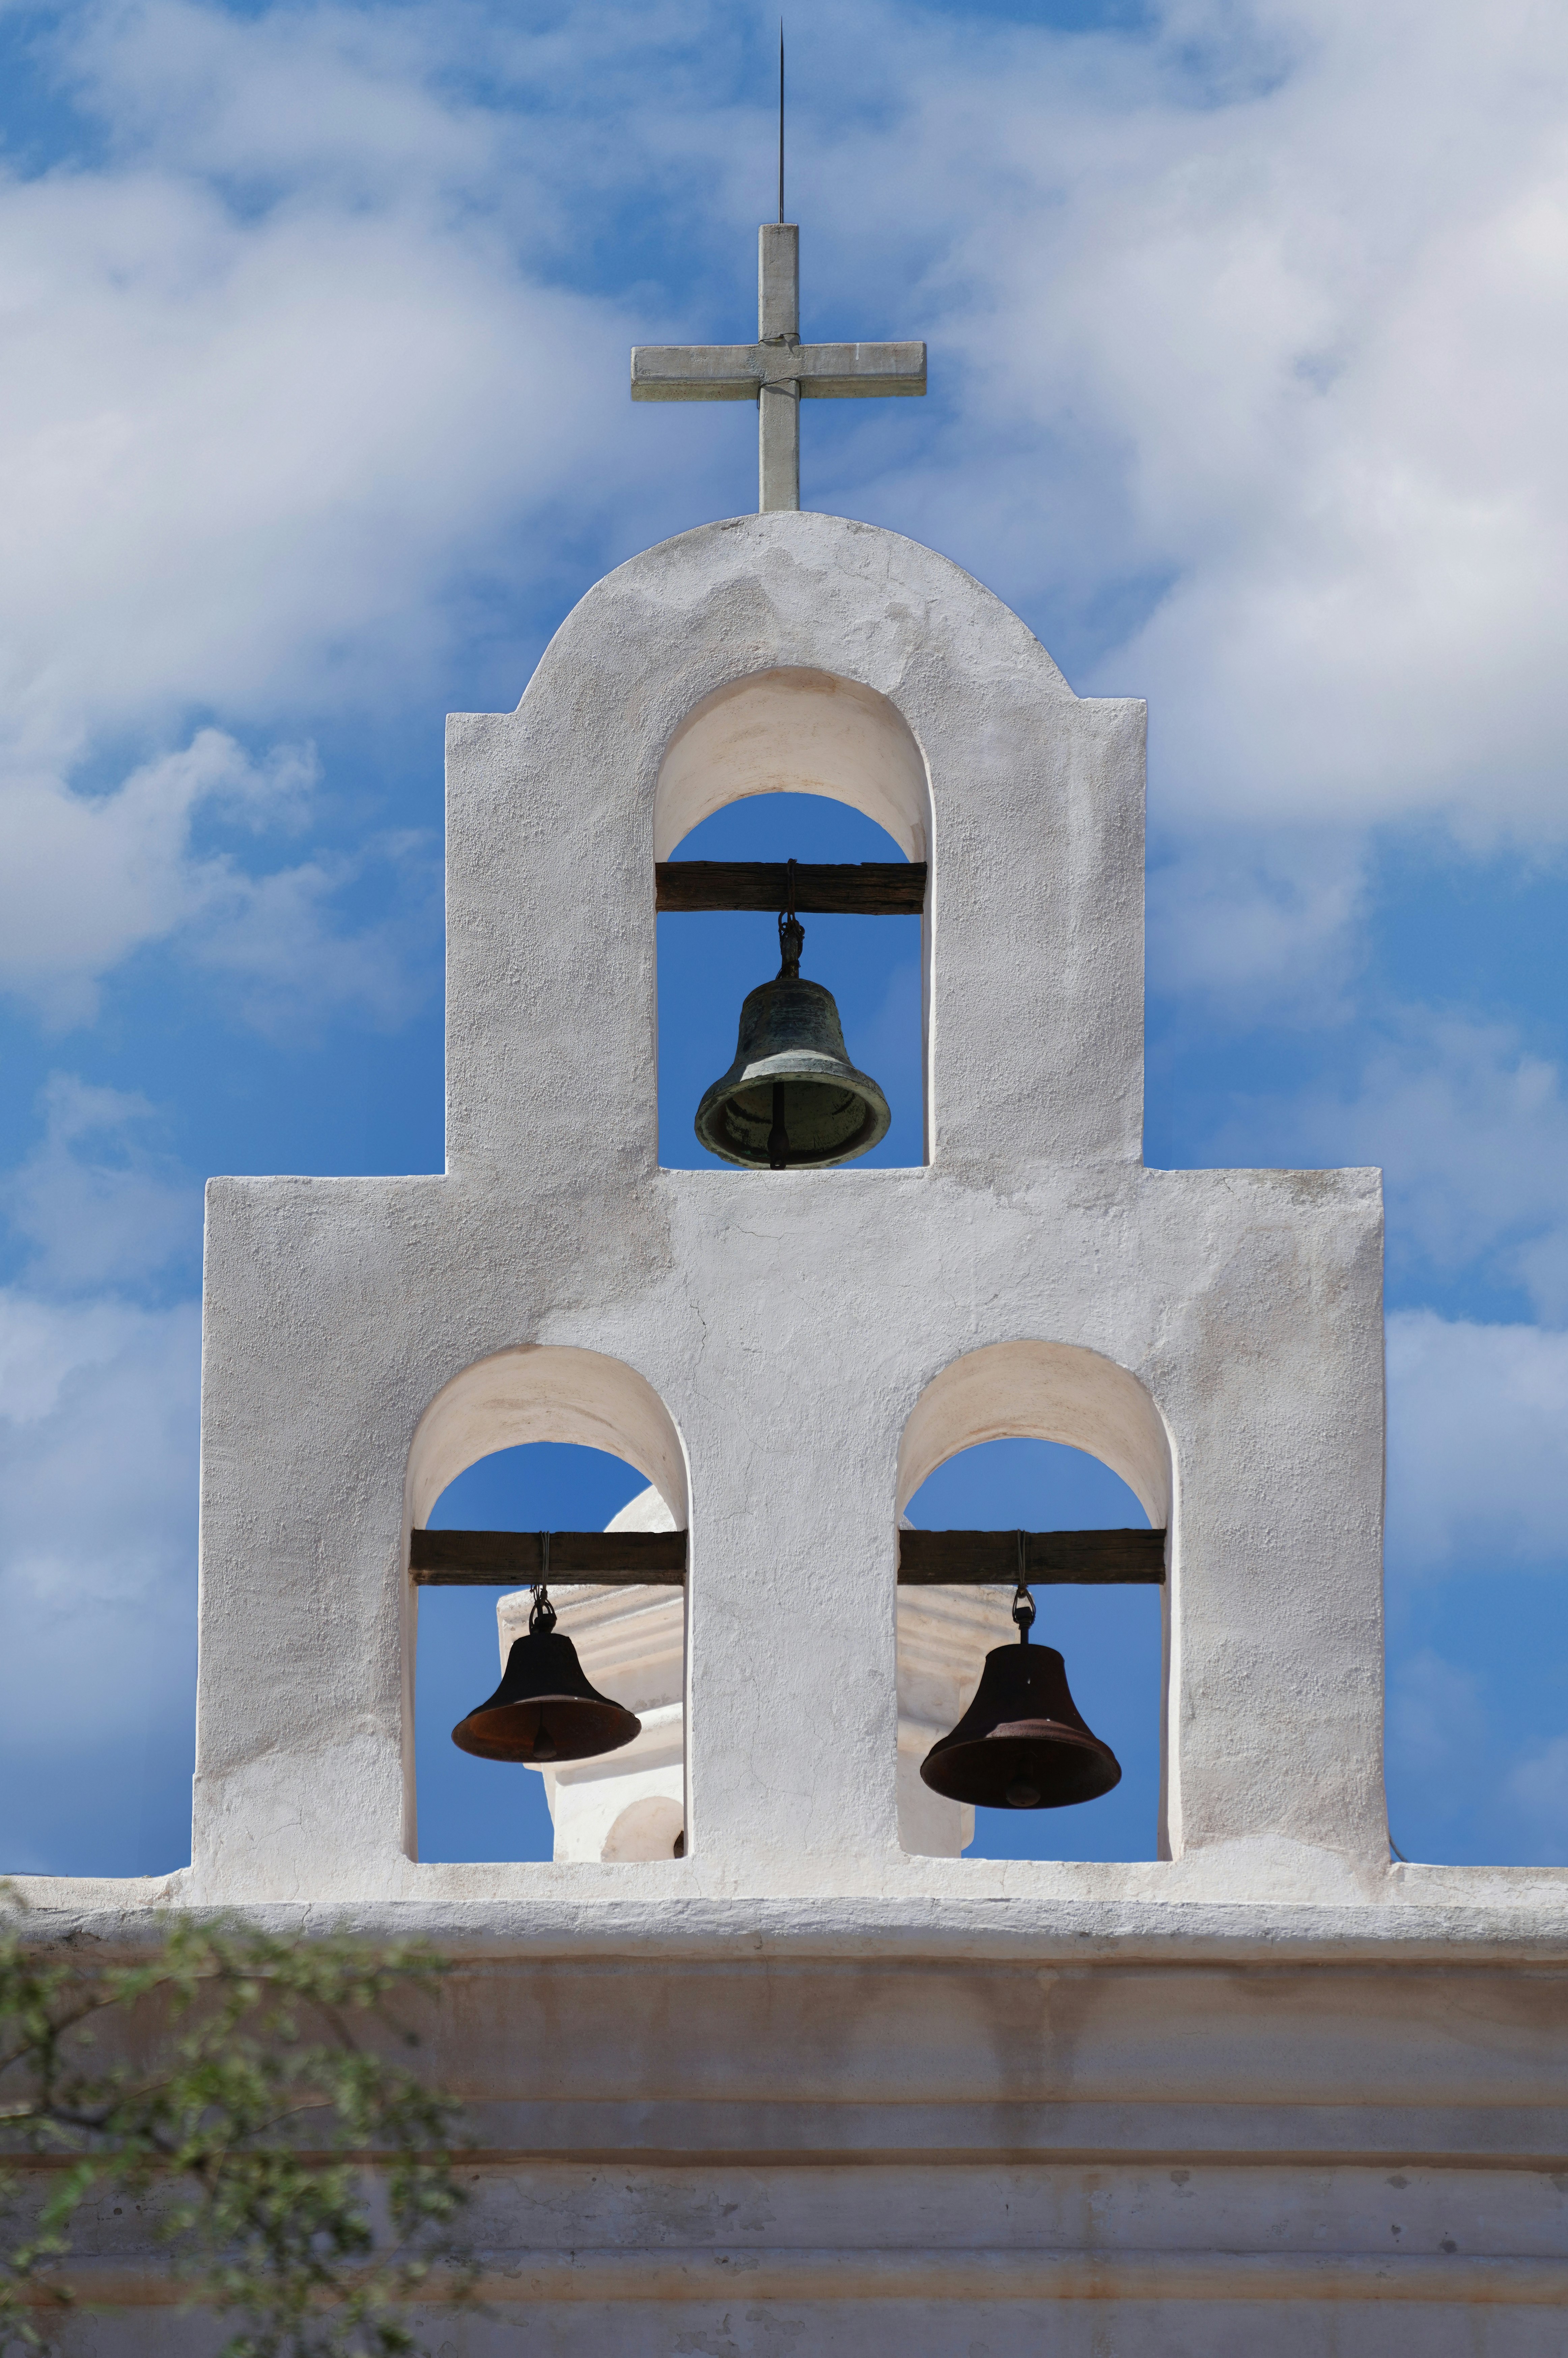 gray concrete bell under blue sky during daytime